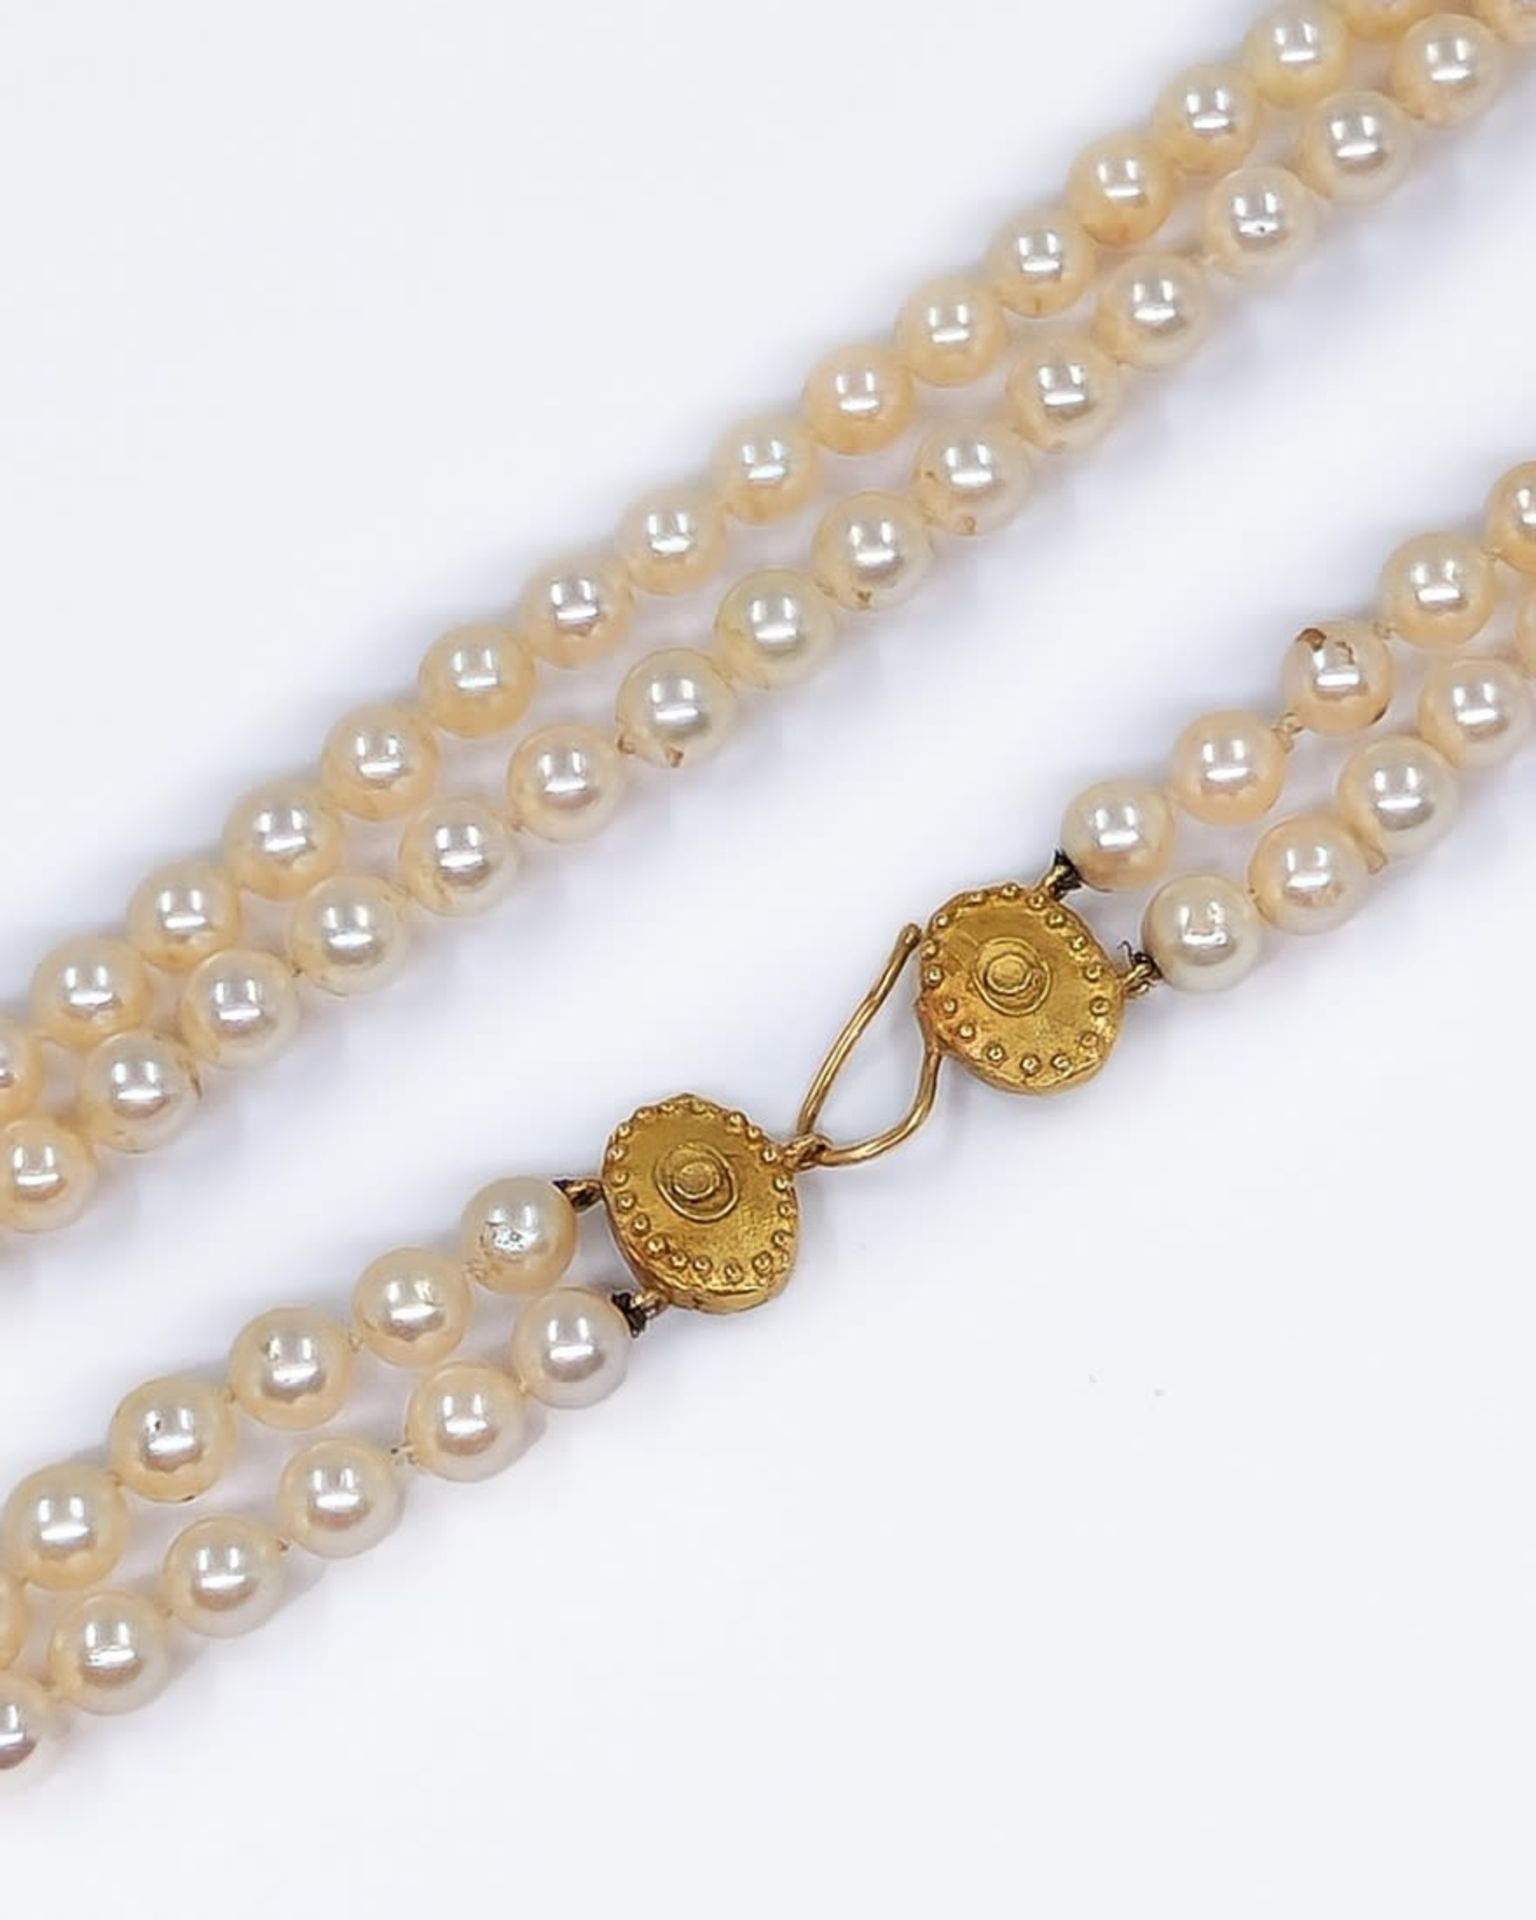 High quality Italian pearl neckless, made of two rows of sea pearls and a bracket made of 18 karat - Image 4 of 4